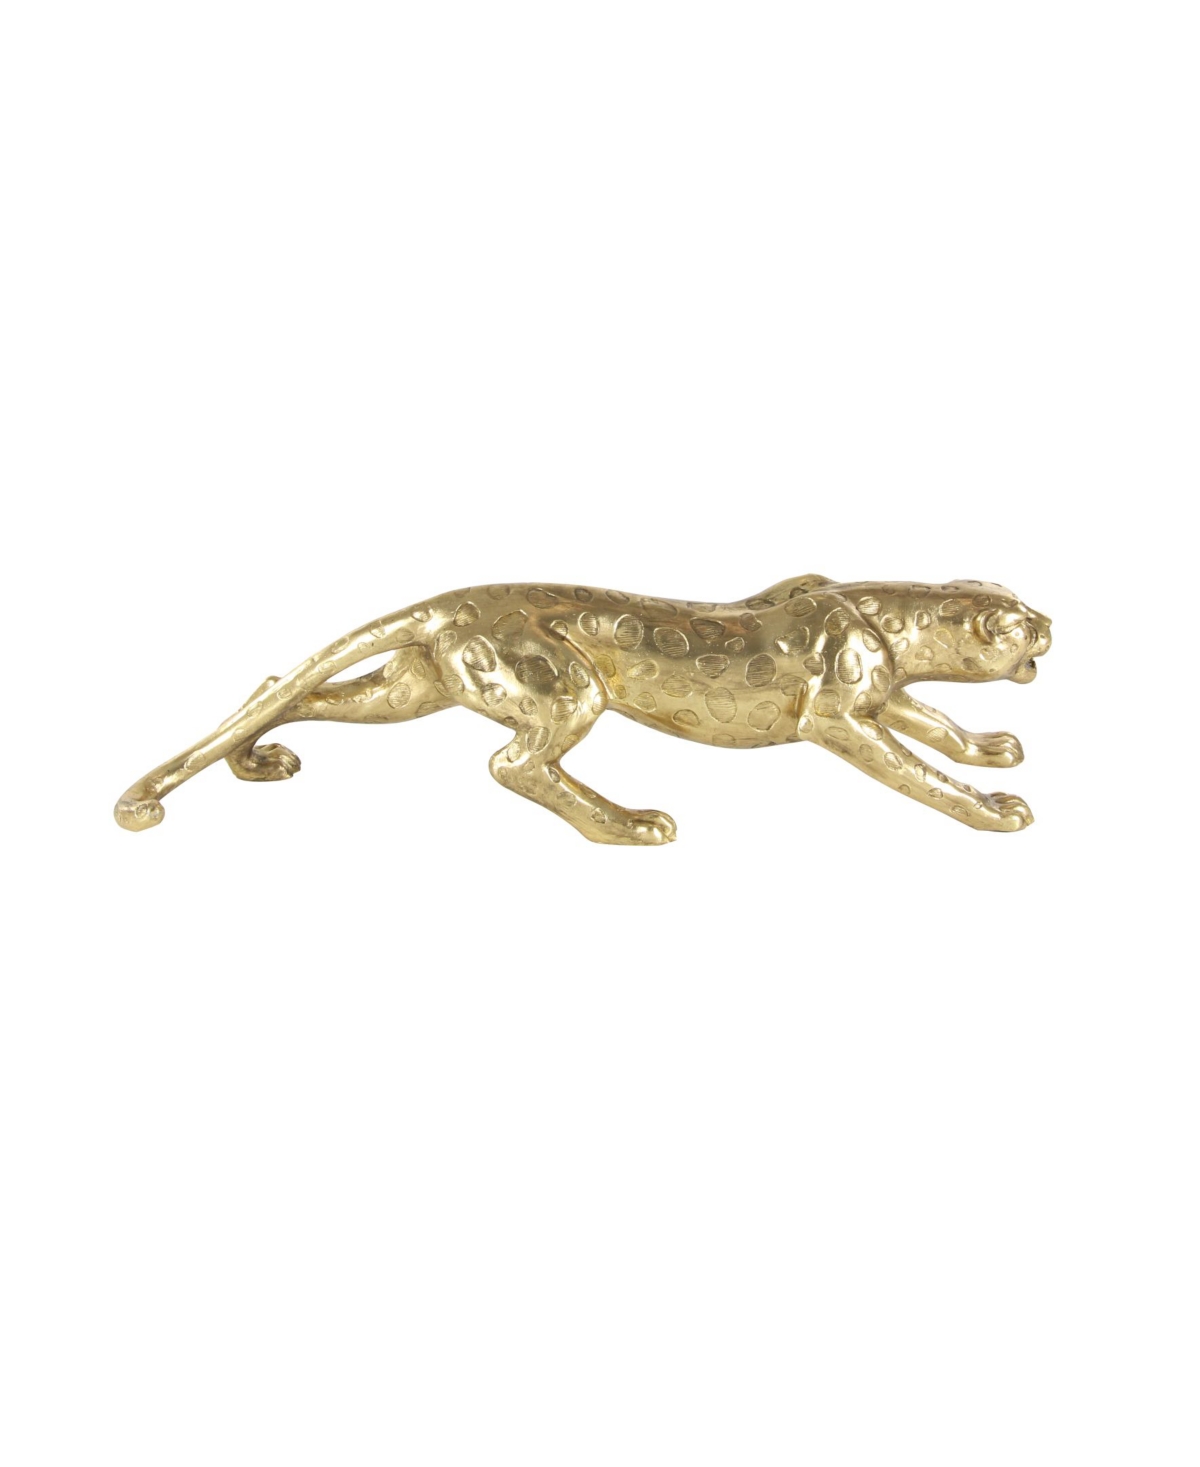 Rosemary Lane Glam Leopard Sculpture, 8" X 34" In Gold-tone